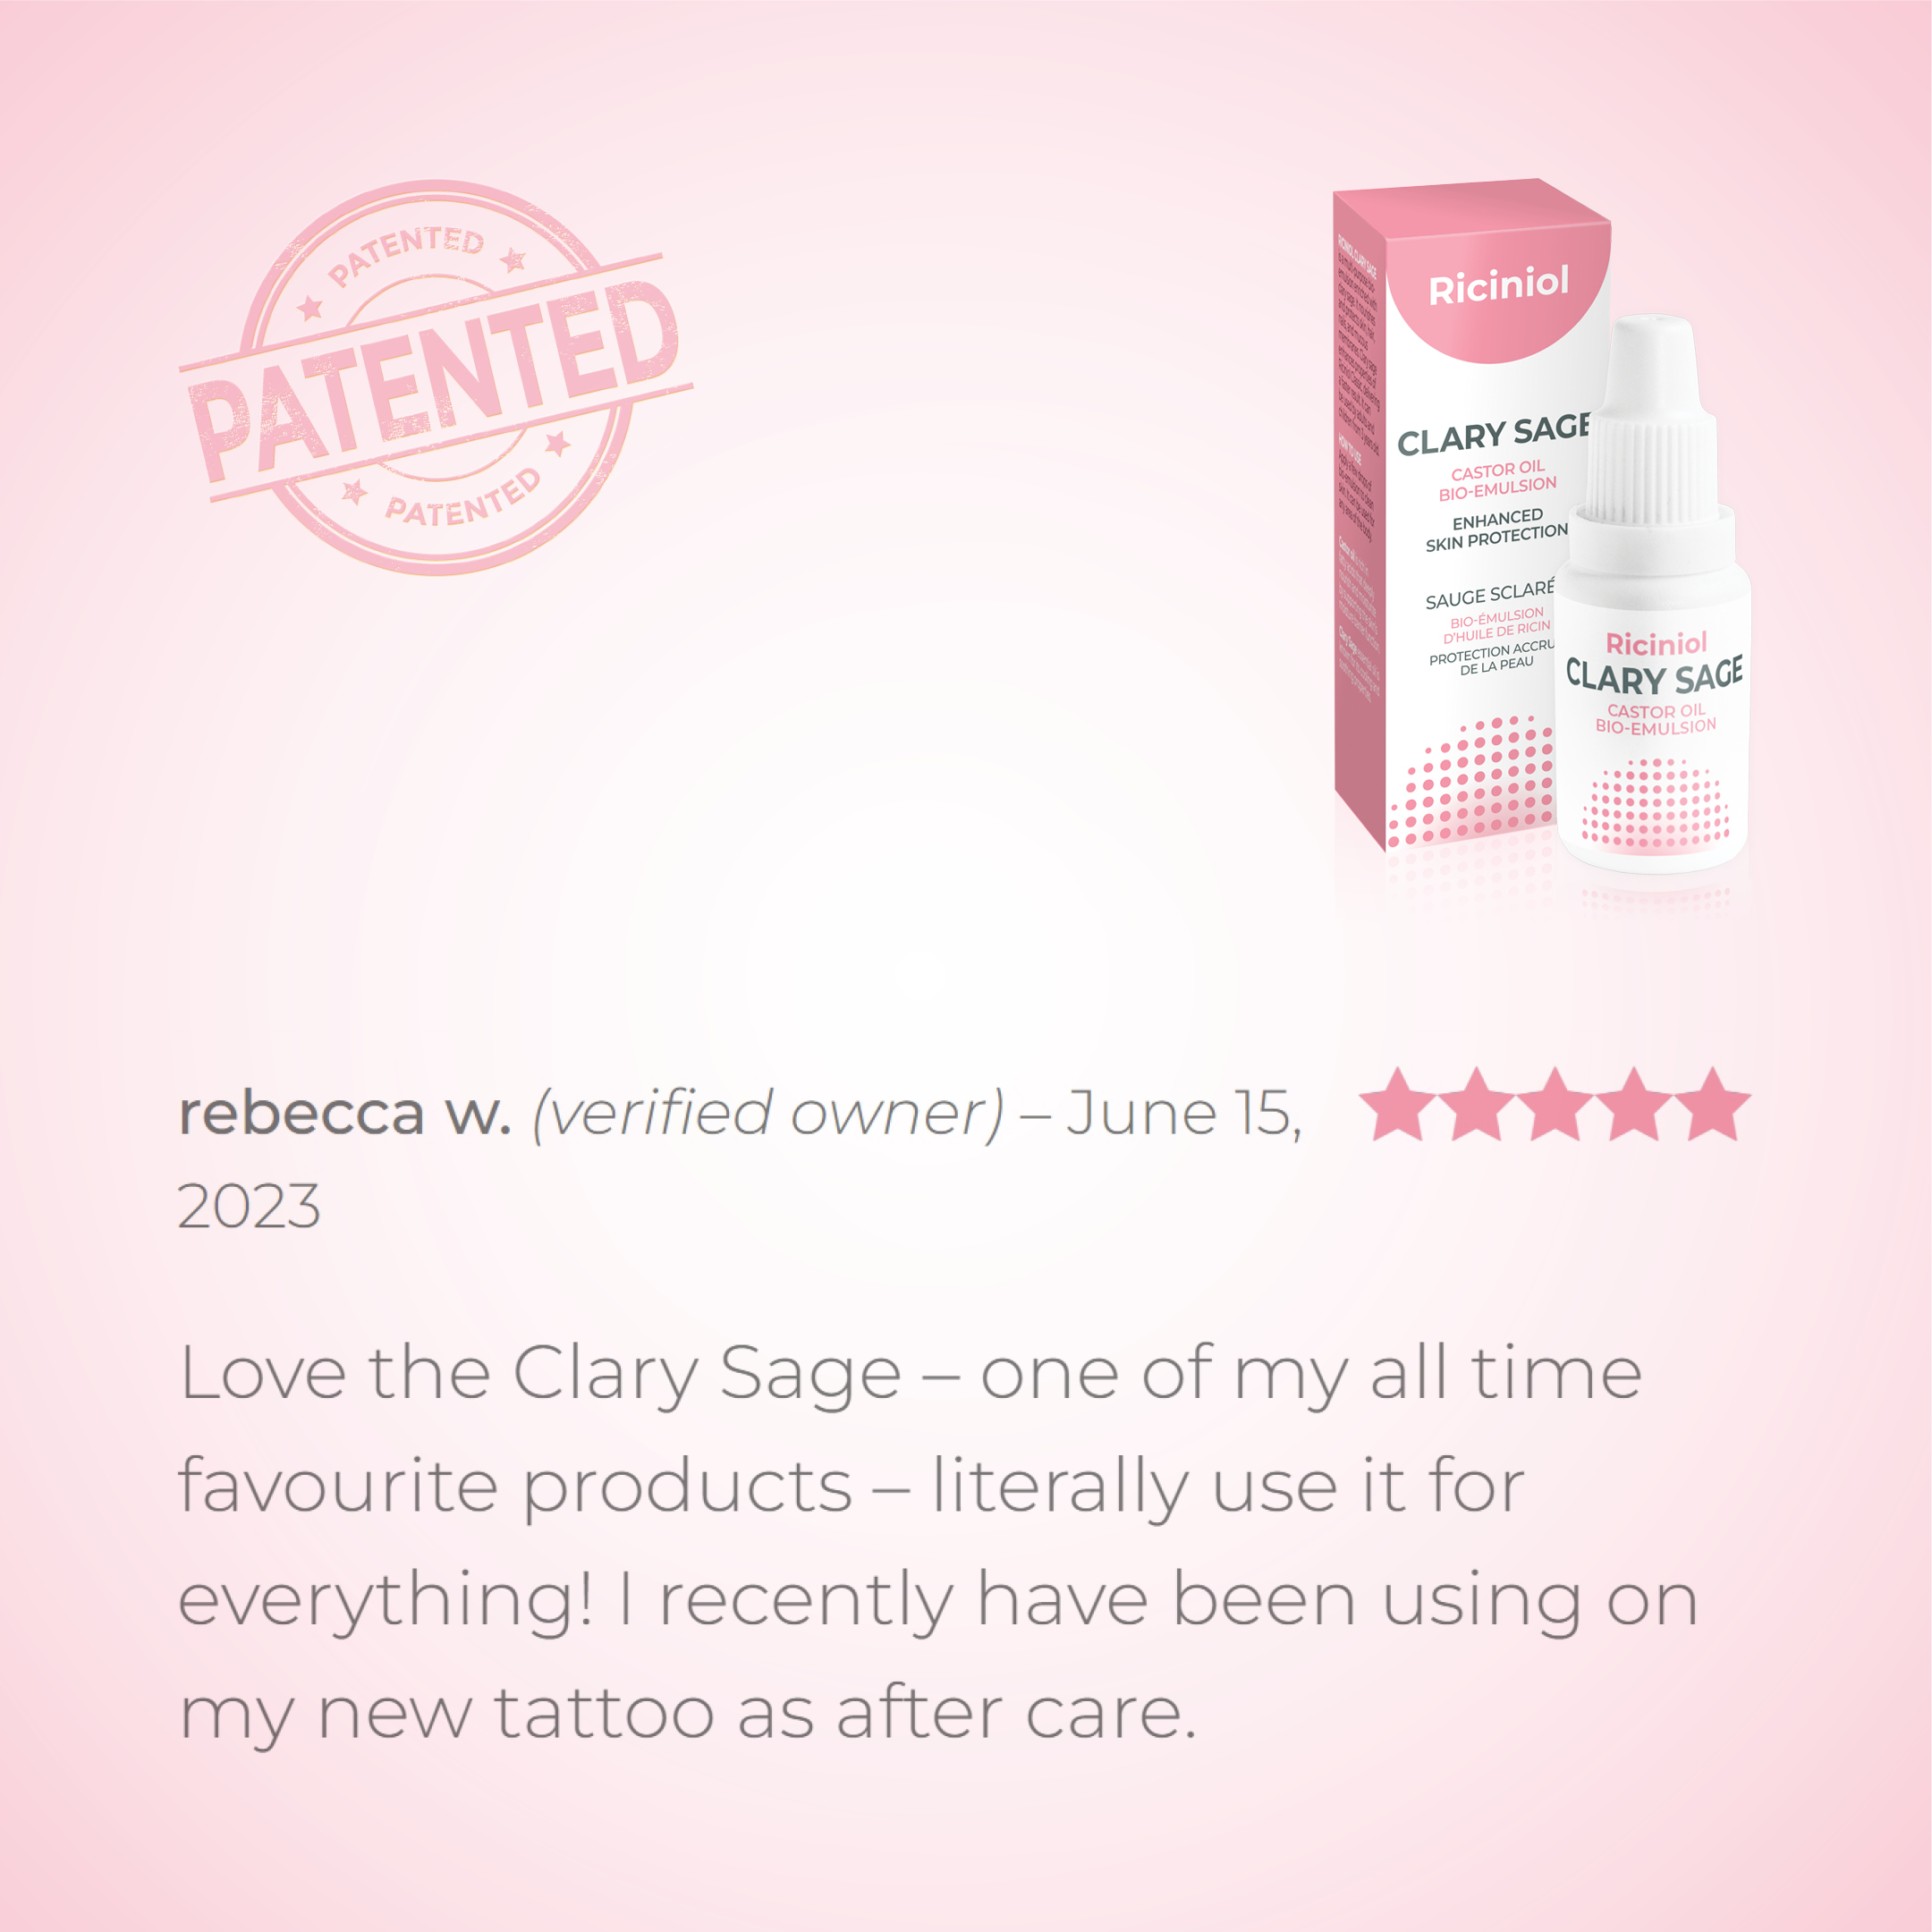 Riciniol Clary Sage by rebecca w. Love the Clary Sage – one of my all time favourite products – literally use it for everything! I recently have been using on my new tattoo as after care.